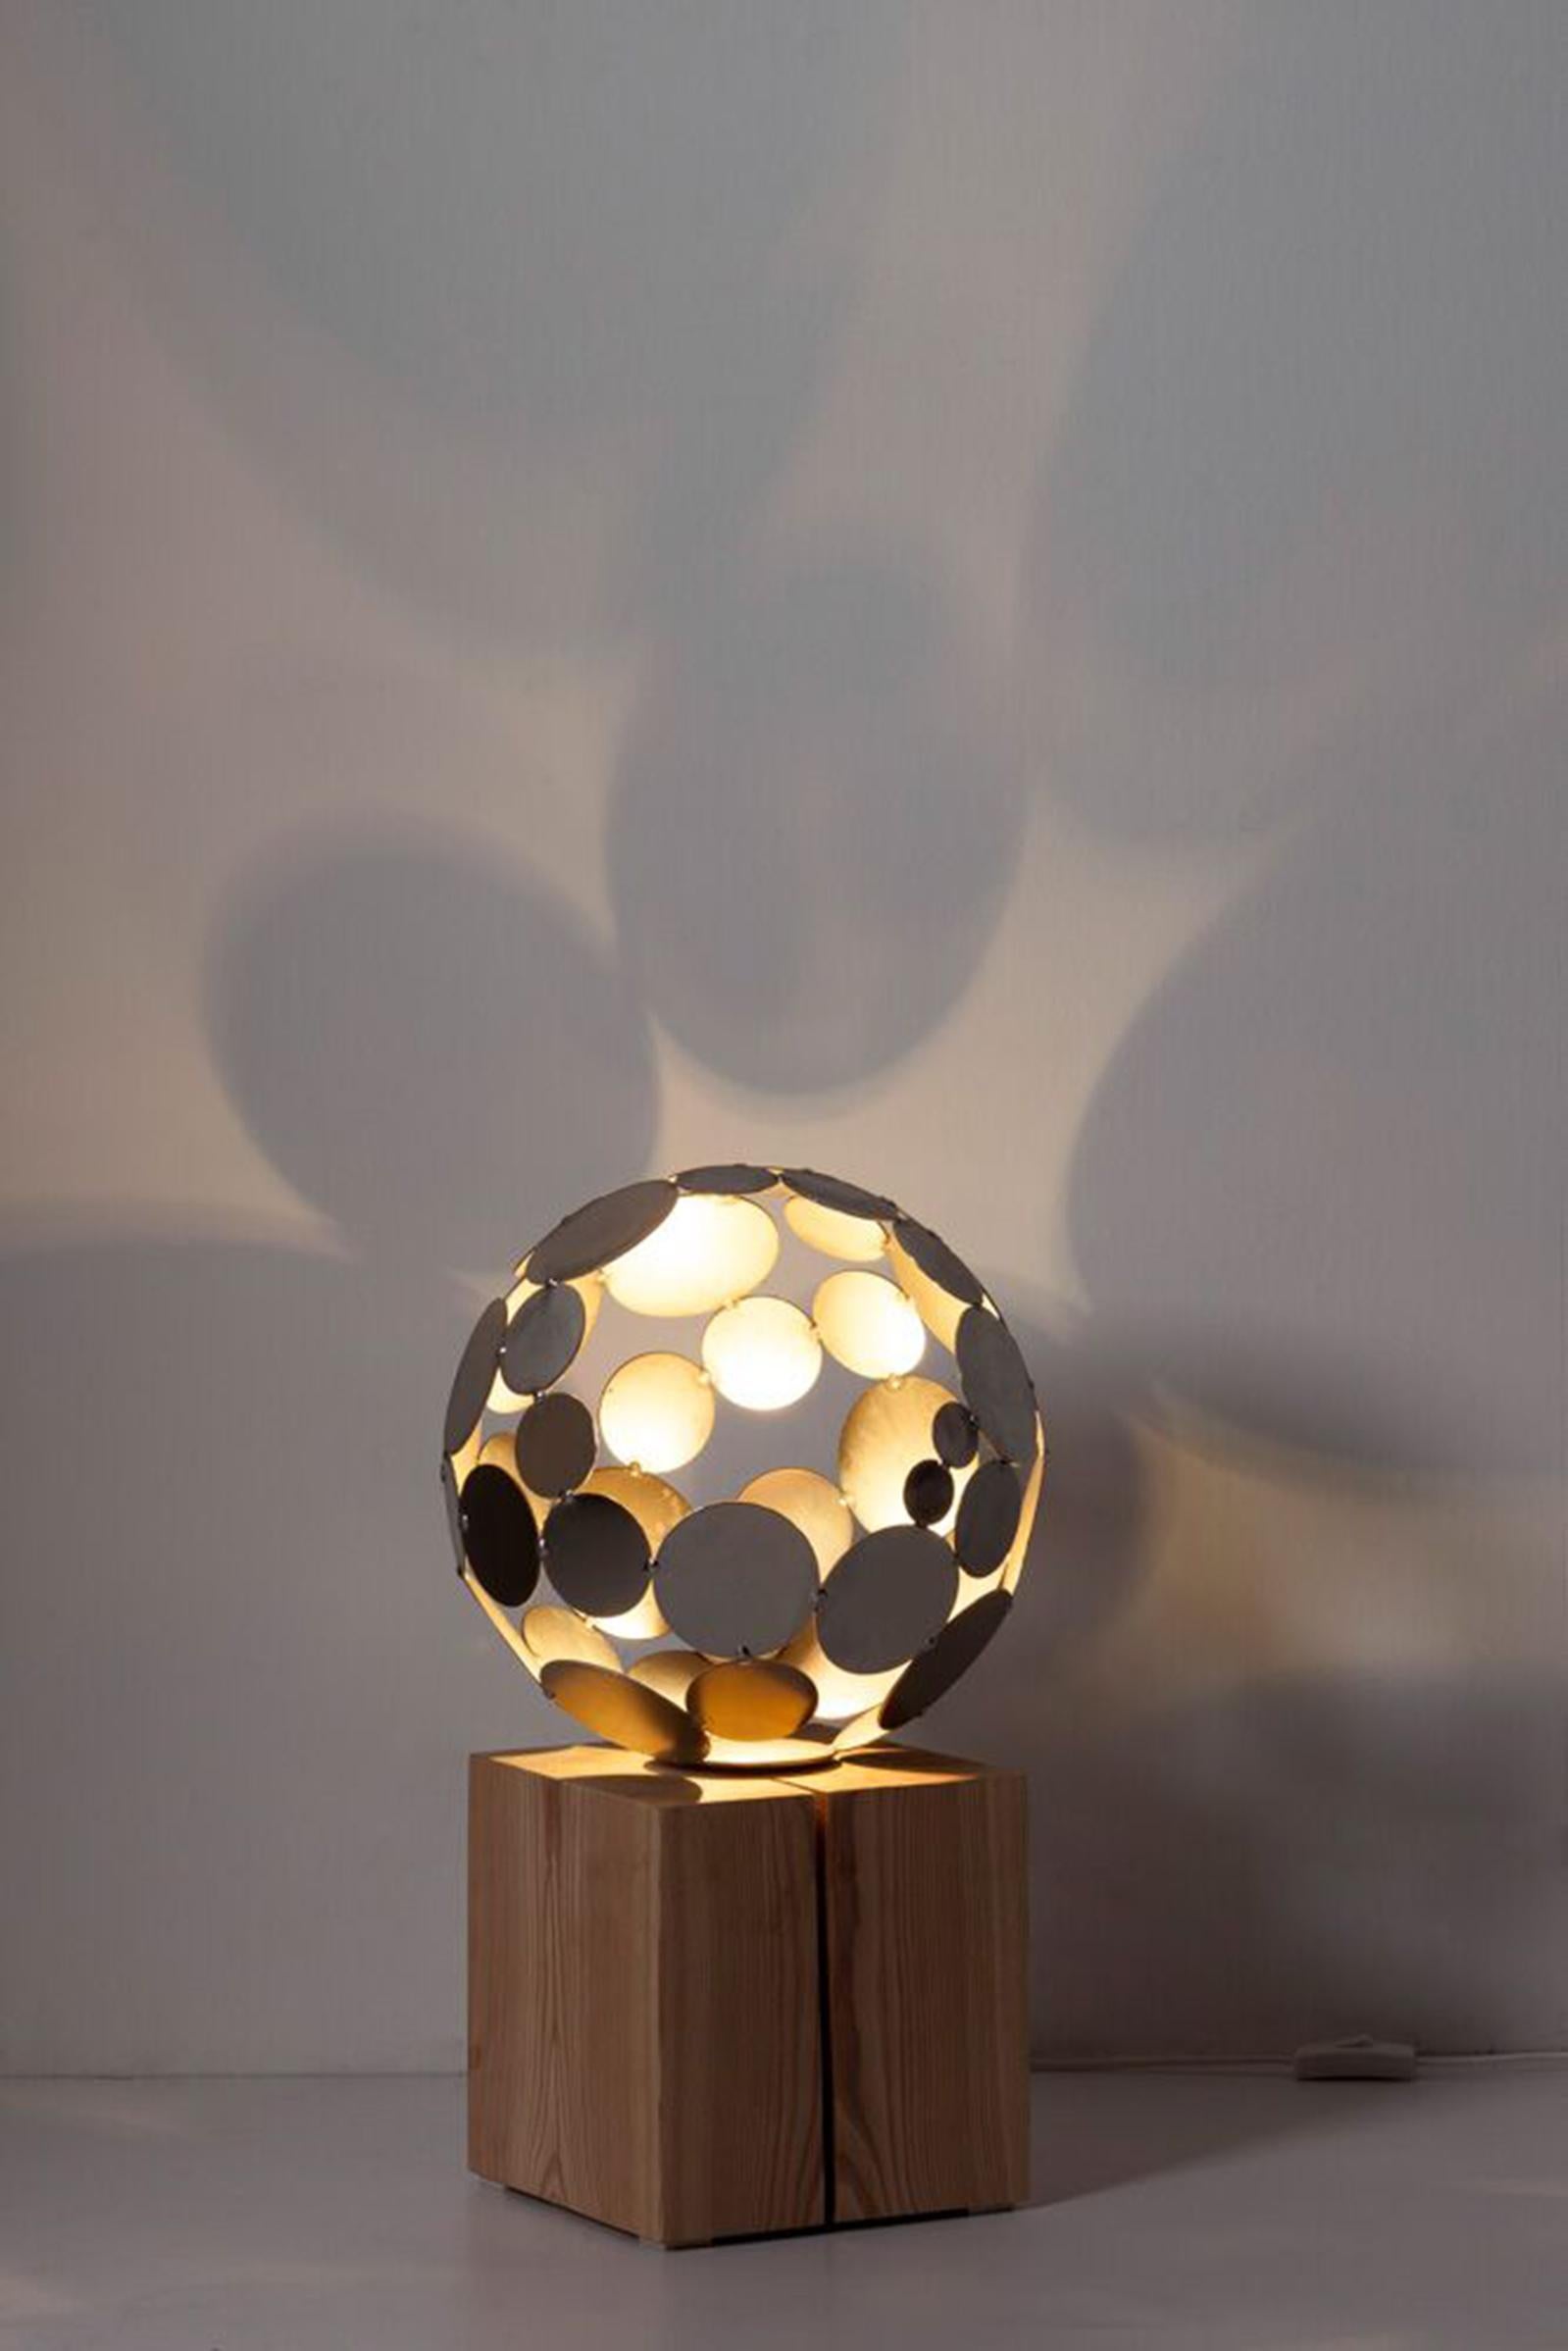 Contemporary Sculpture - "Globe Lamp", rusted on an oak pedestal - small height